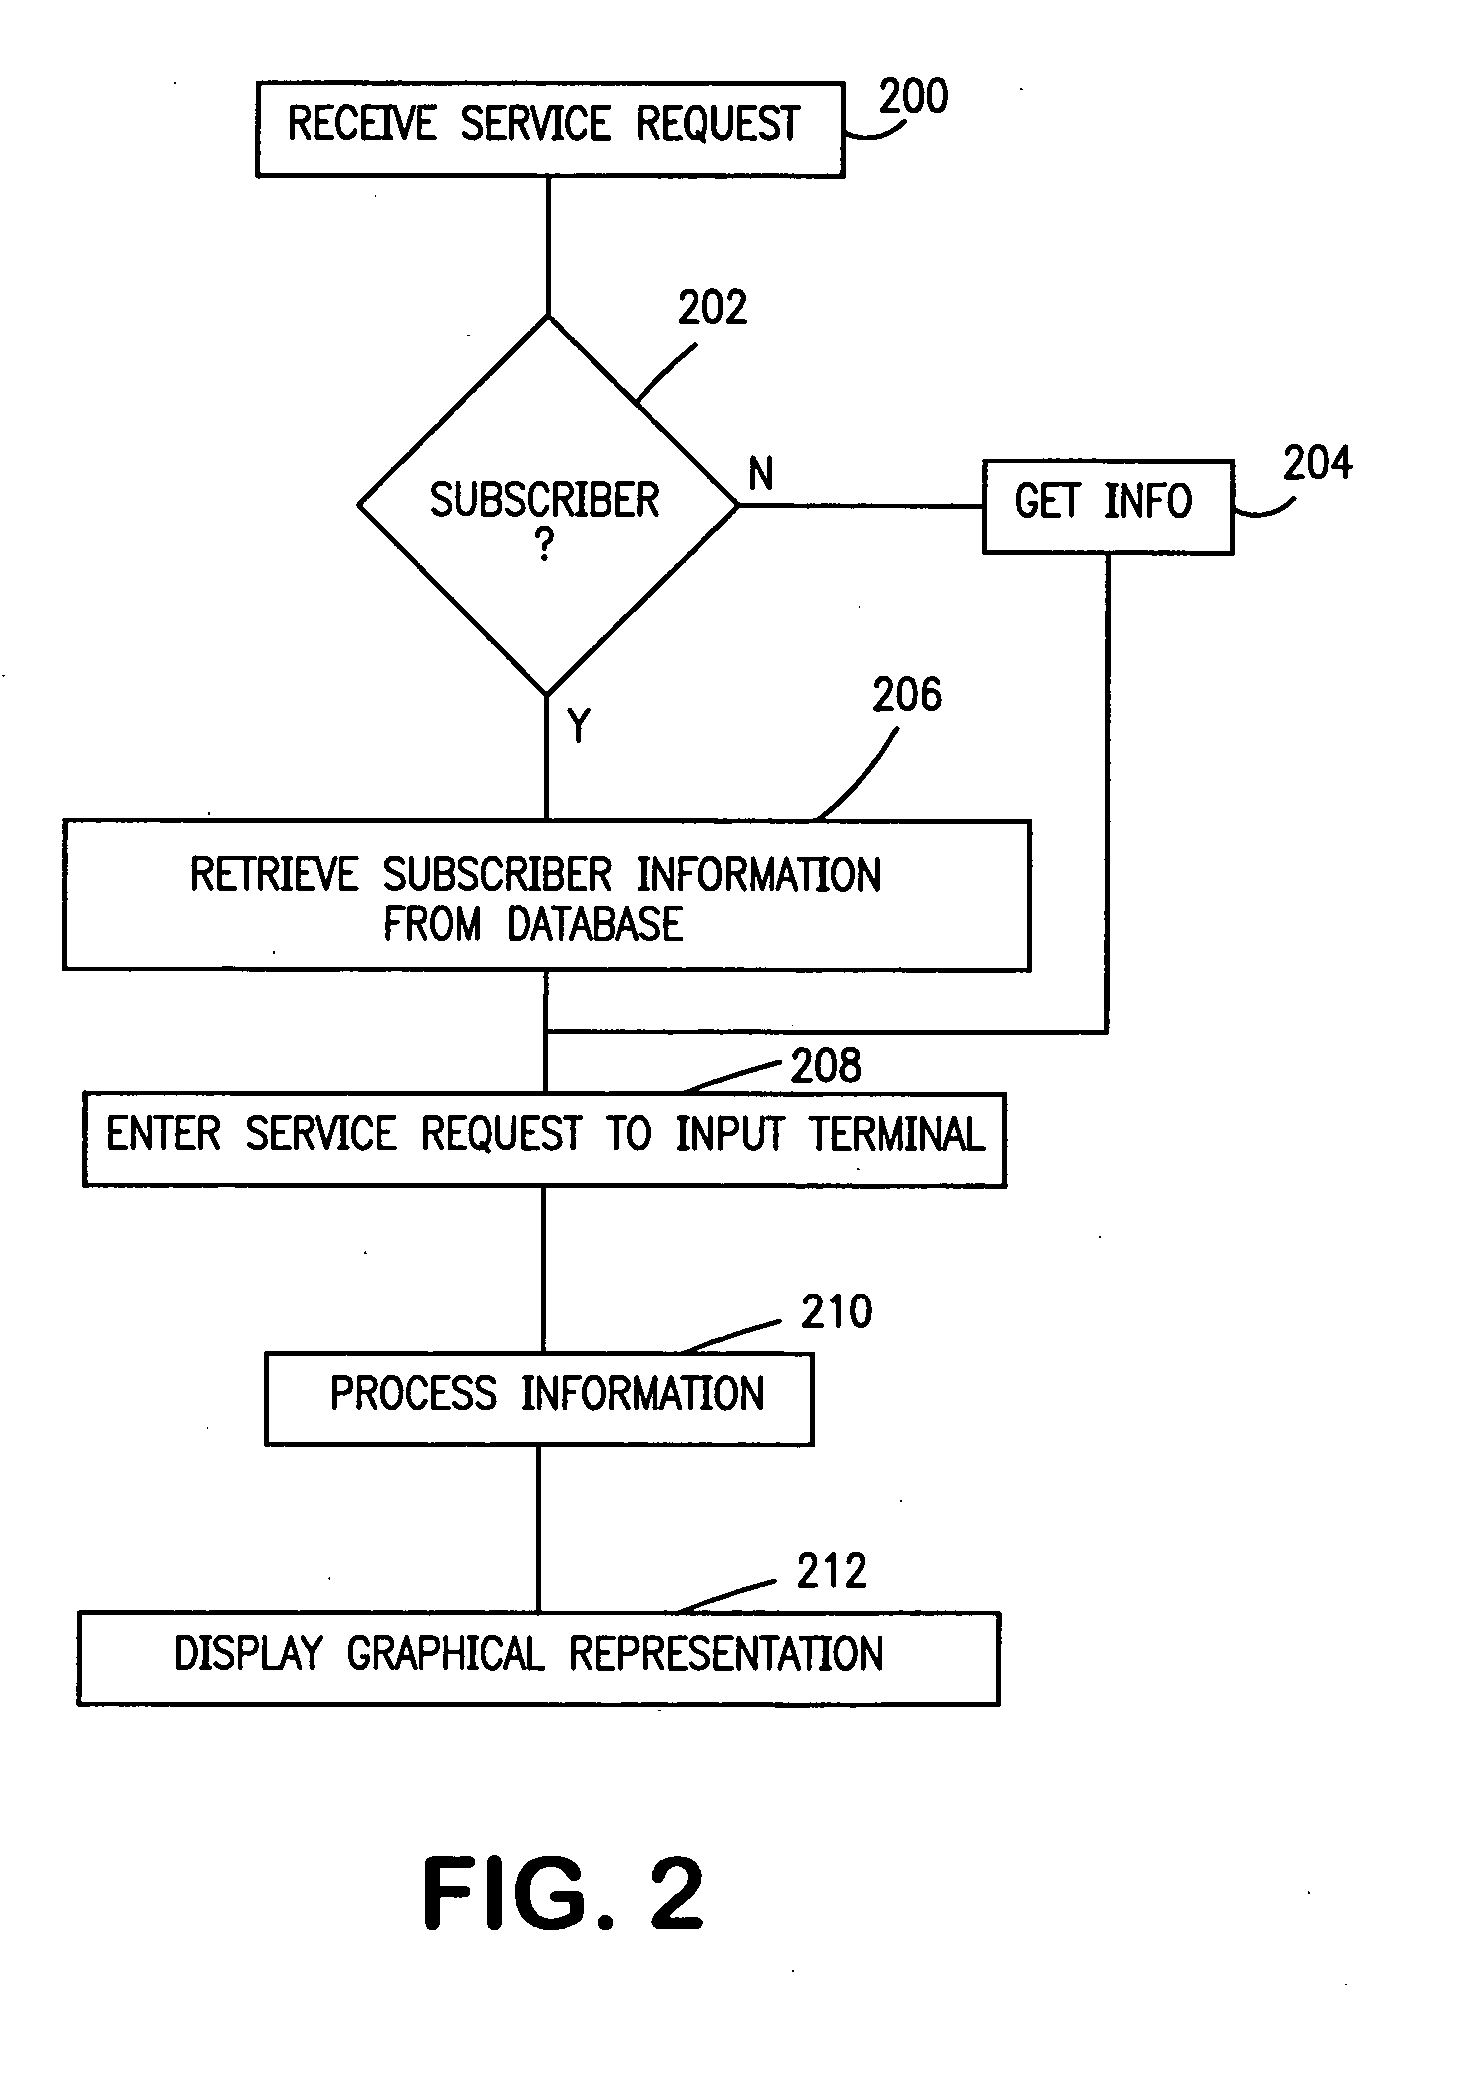 System and method for computer-aided technician dispatch and communication